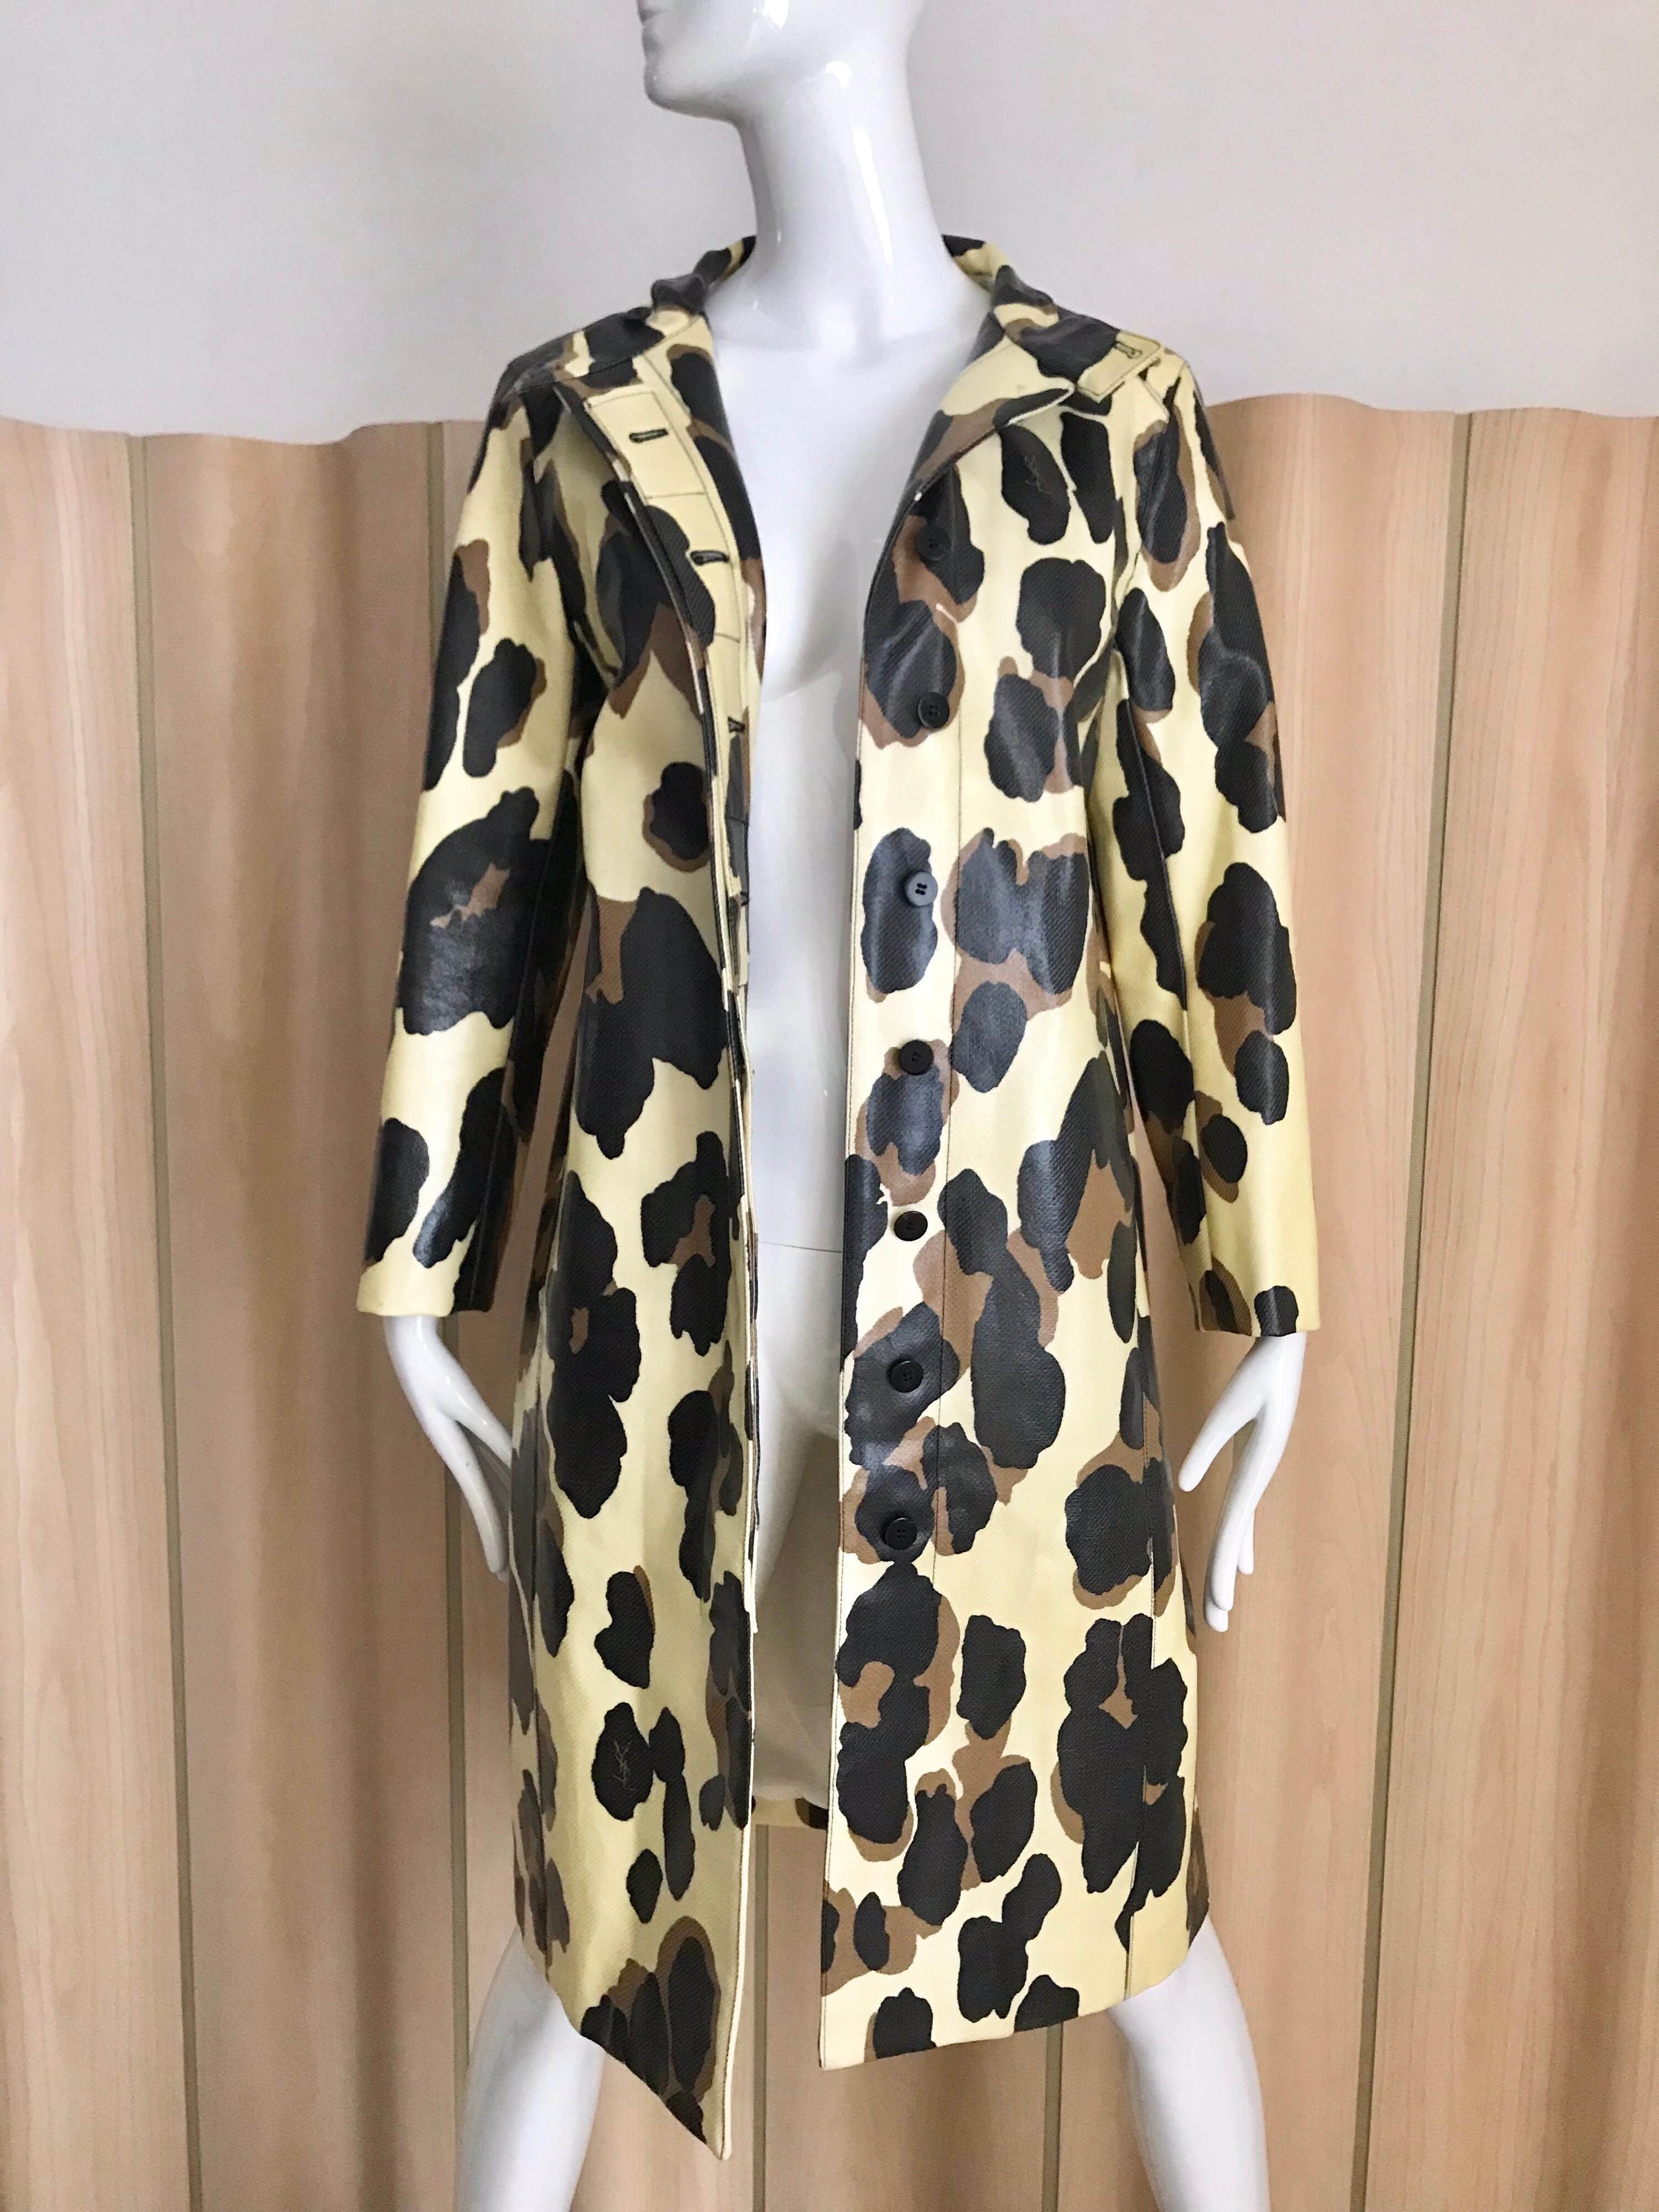 Yves Saint Laurent by Stefano Pilati light Cotton and polyurethane mix animal print coat in creme and brown leopard print. ( missing belt) coat is lined in silk . 
Size: F38 / fit US 4